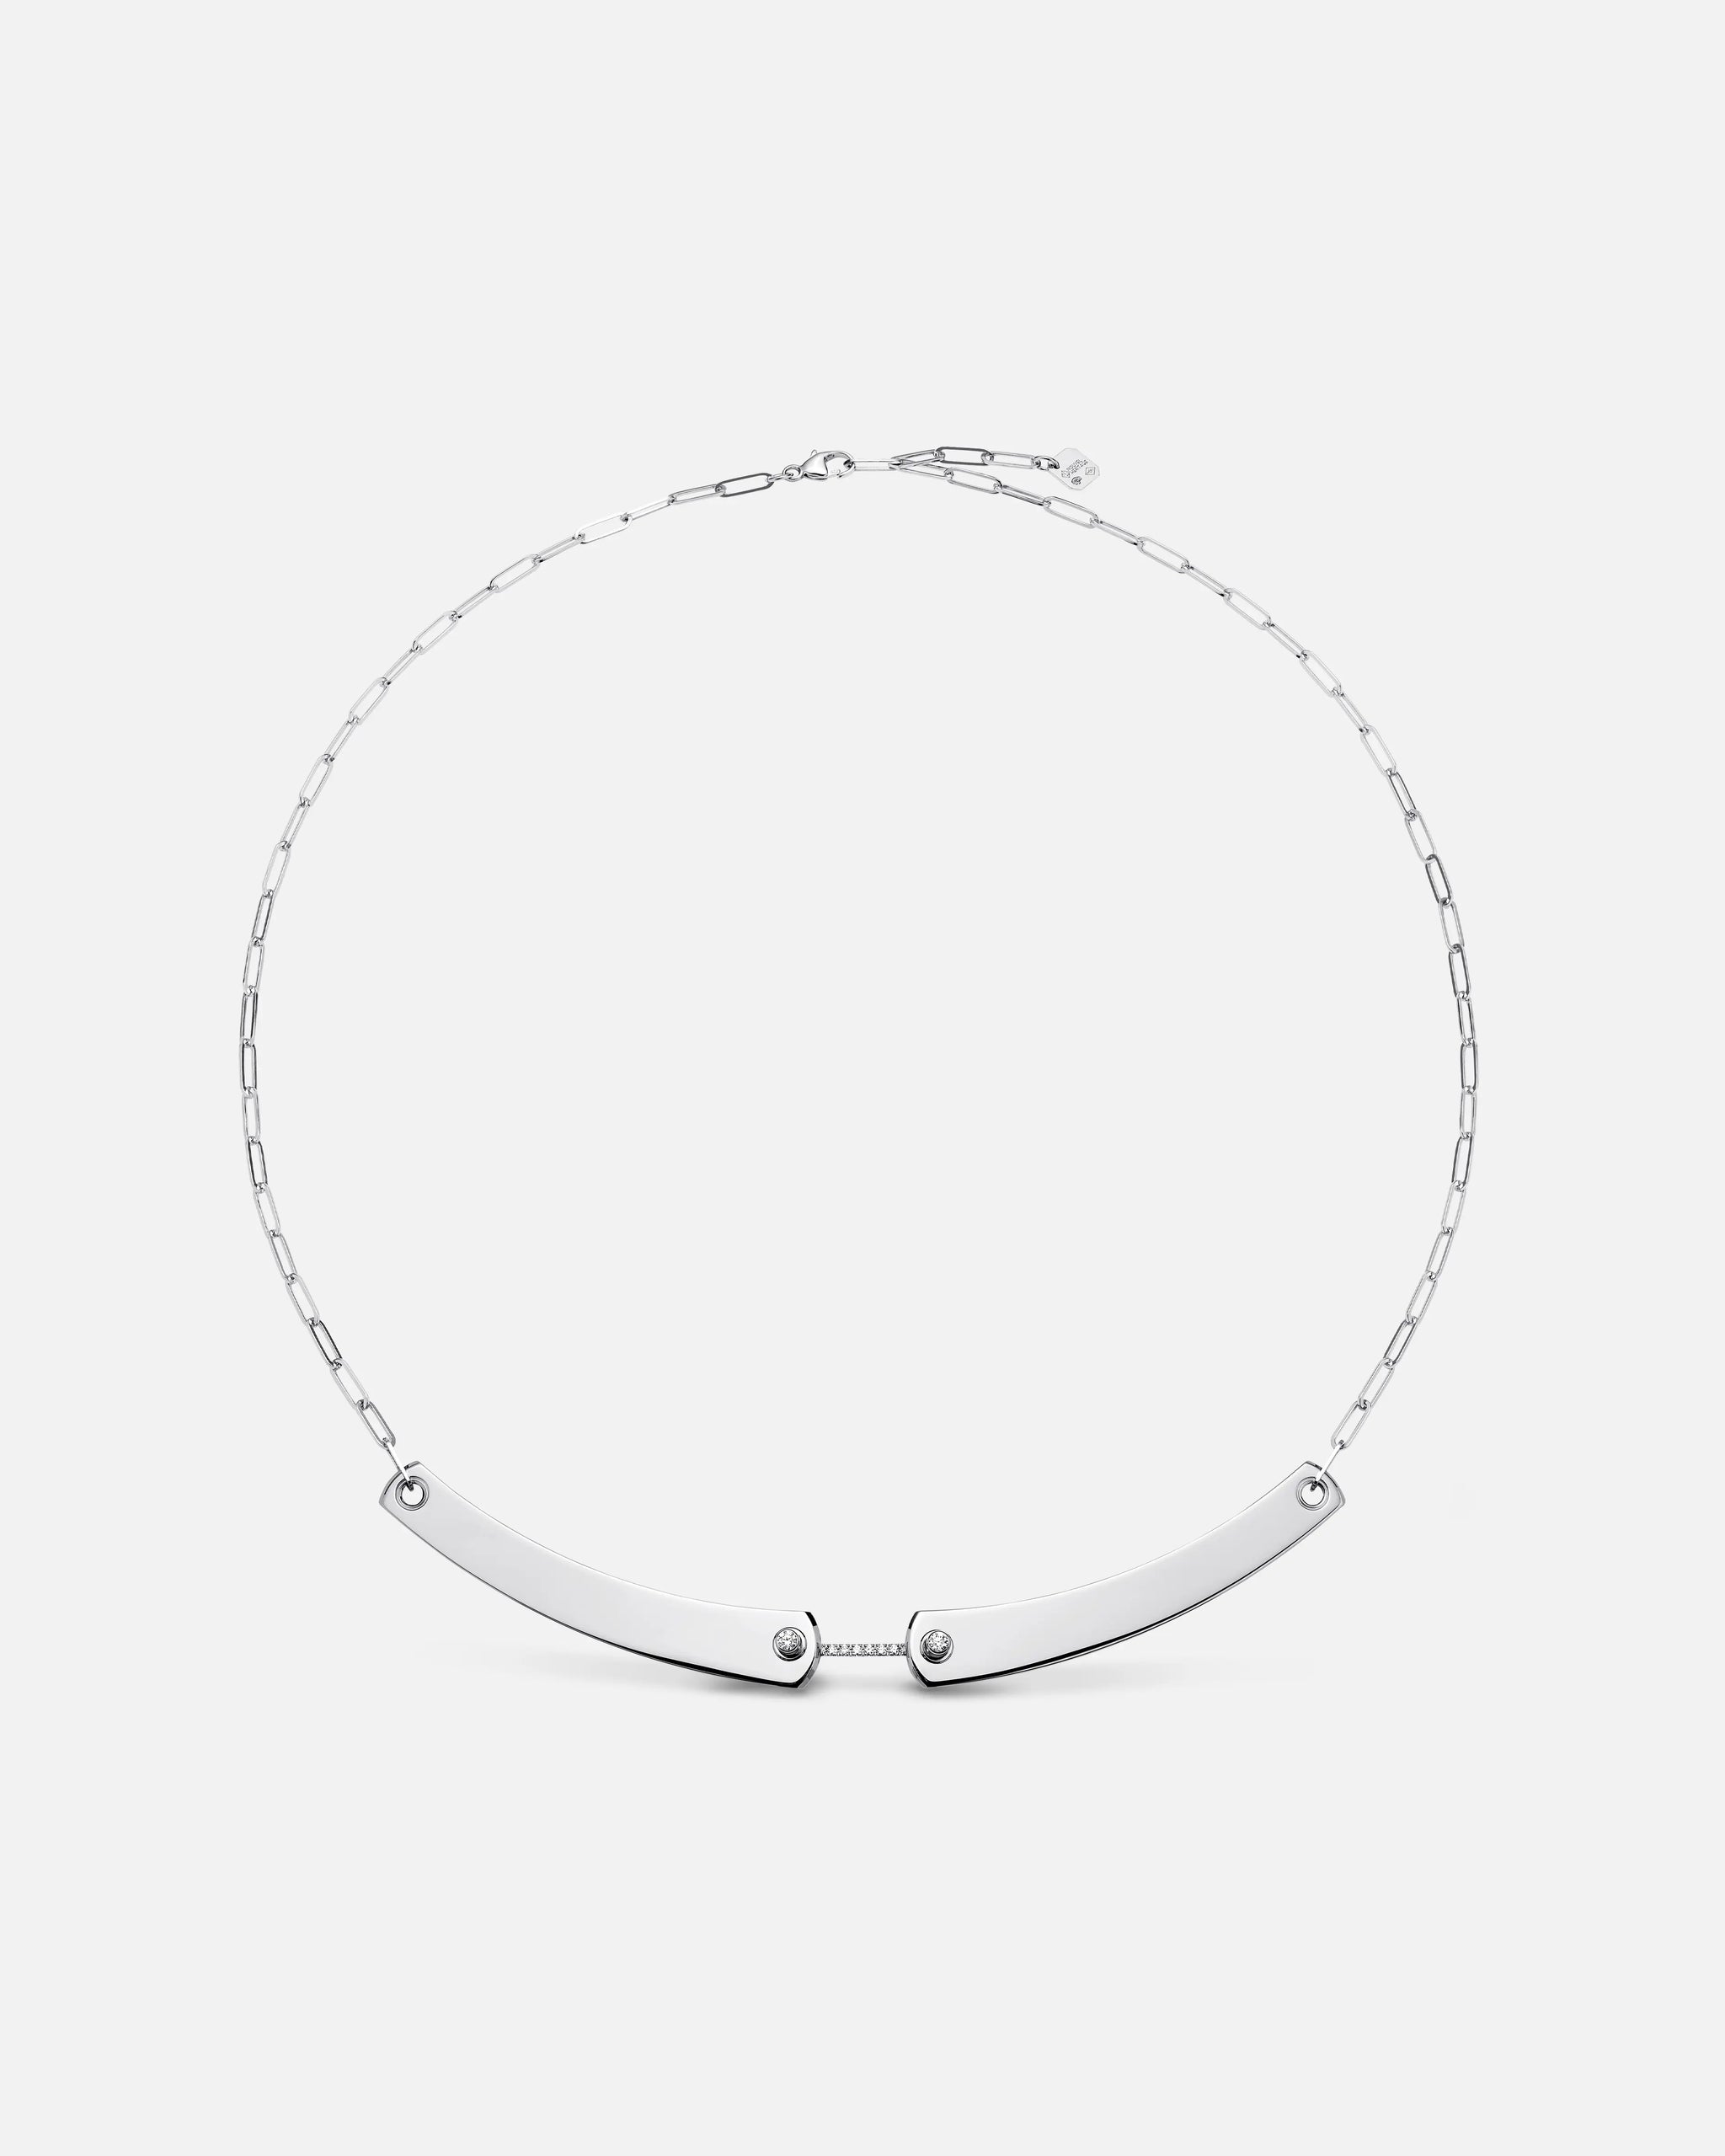 Business Meeting Mood Necklace in White Gold - 1 - Nouvel Heritage